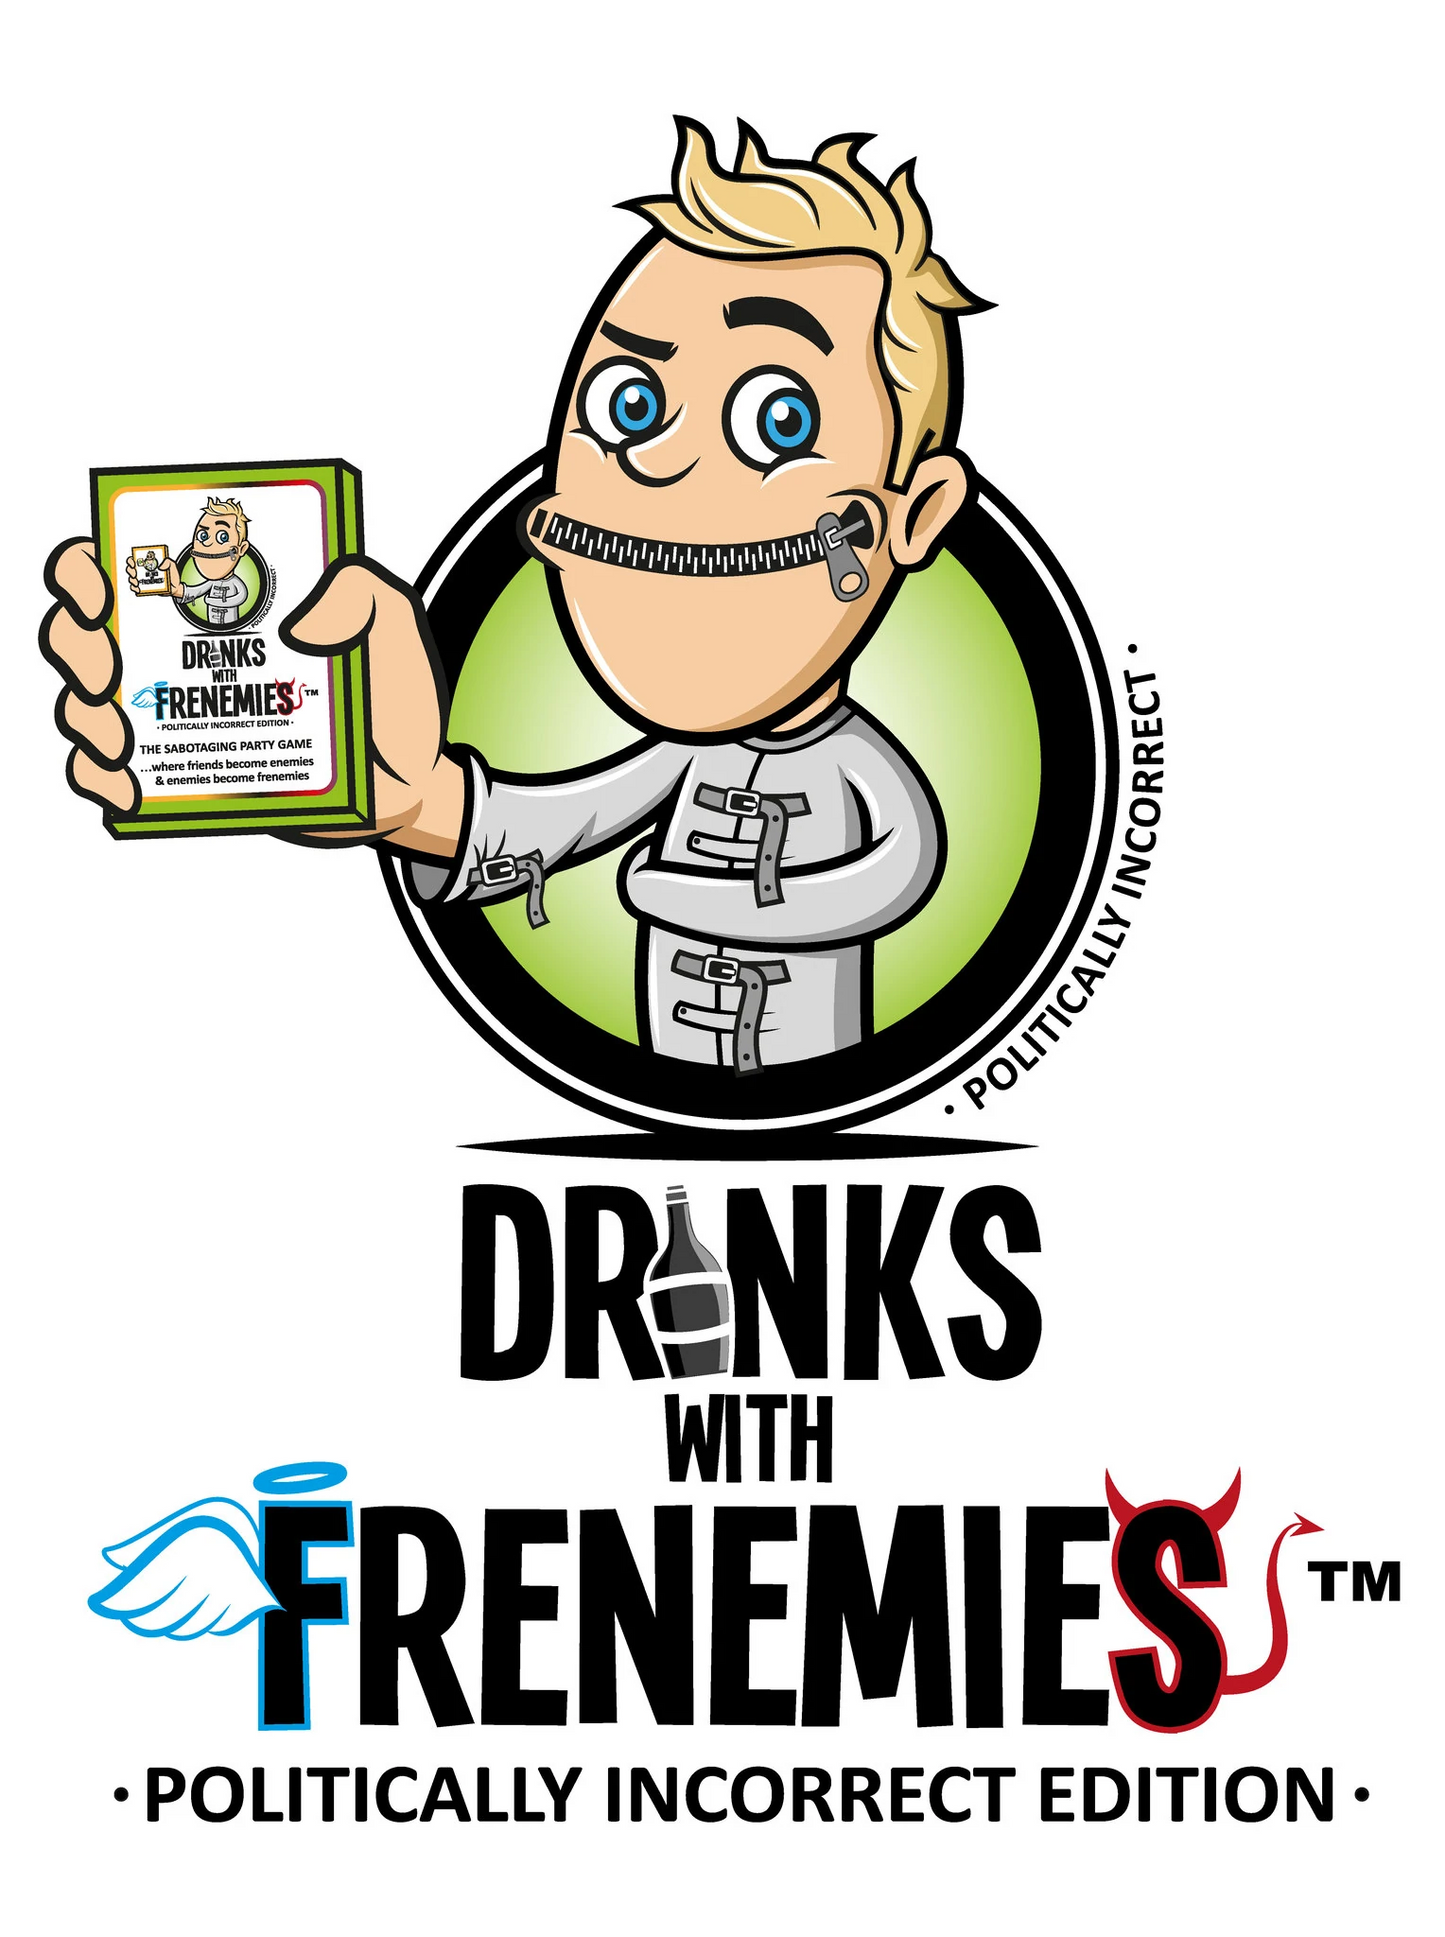 DRINKS WITH FRENEMIES POLITICALLY INCORRECT EDITION